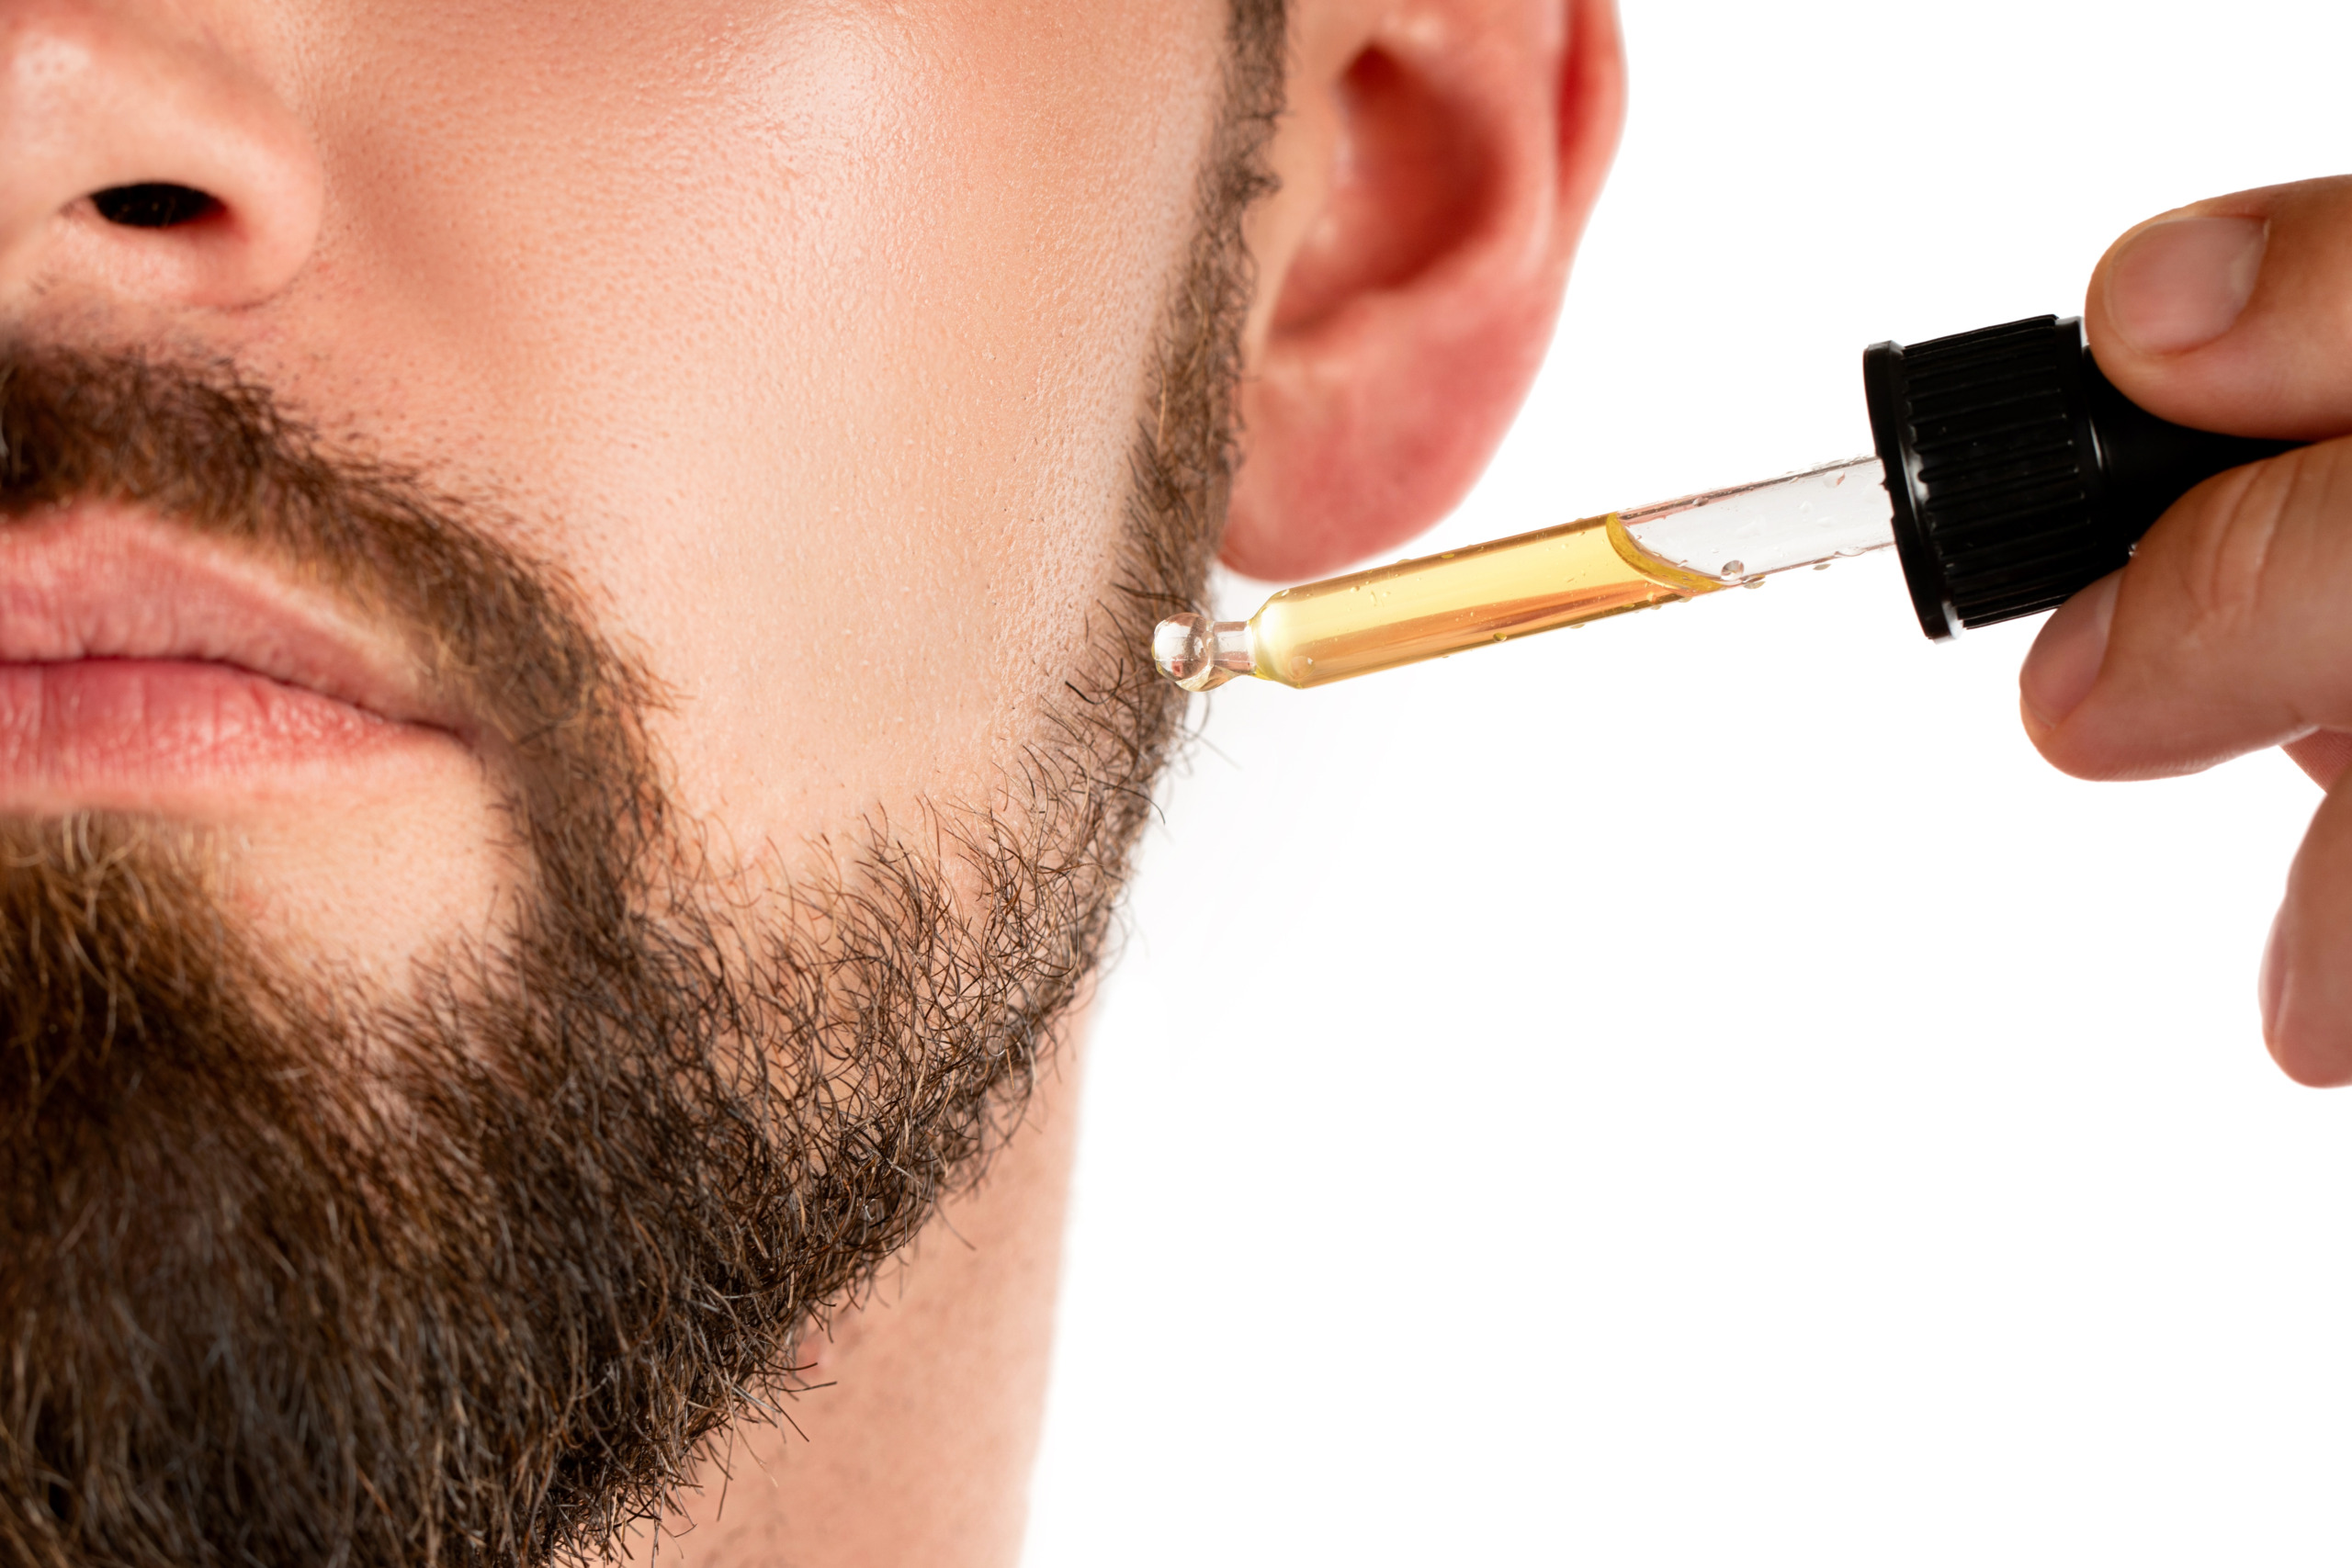 Rosemary Oil For Beard Growth: Does It Work? - Wimpole Clinic